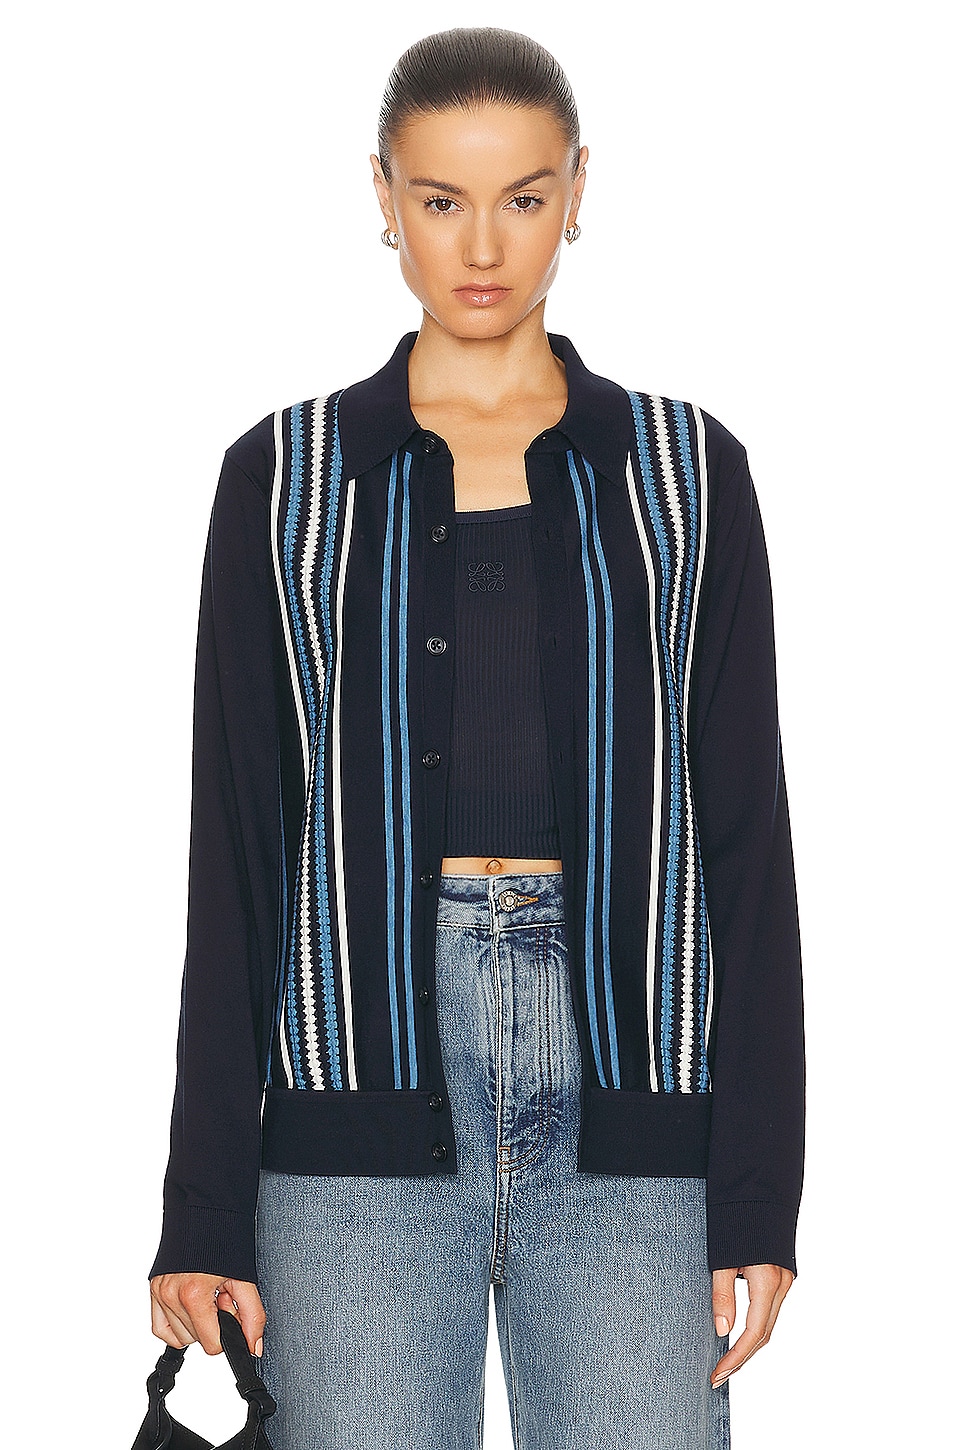 Image 1 of Guest In Residence Stripe Plaza Shirt in Midnight, Denim Blue, & Cream